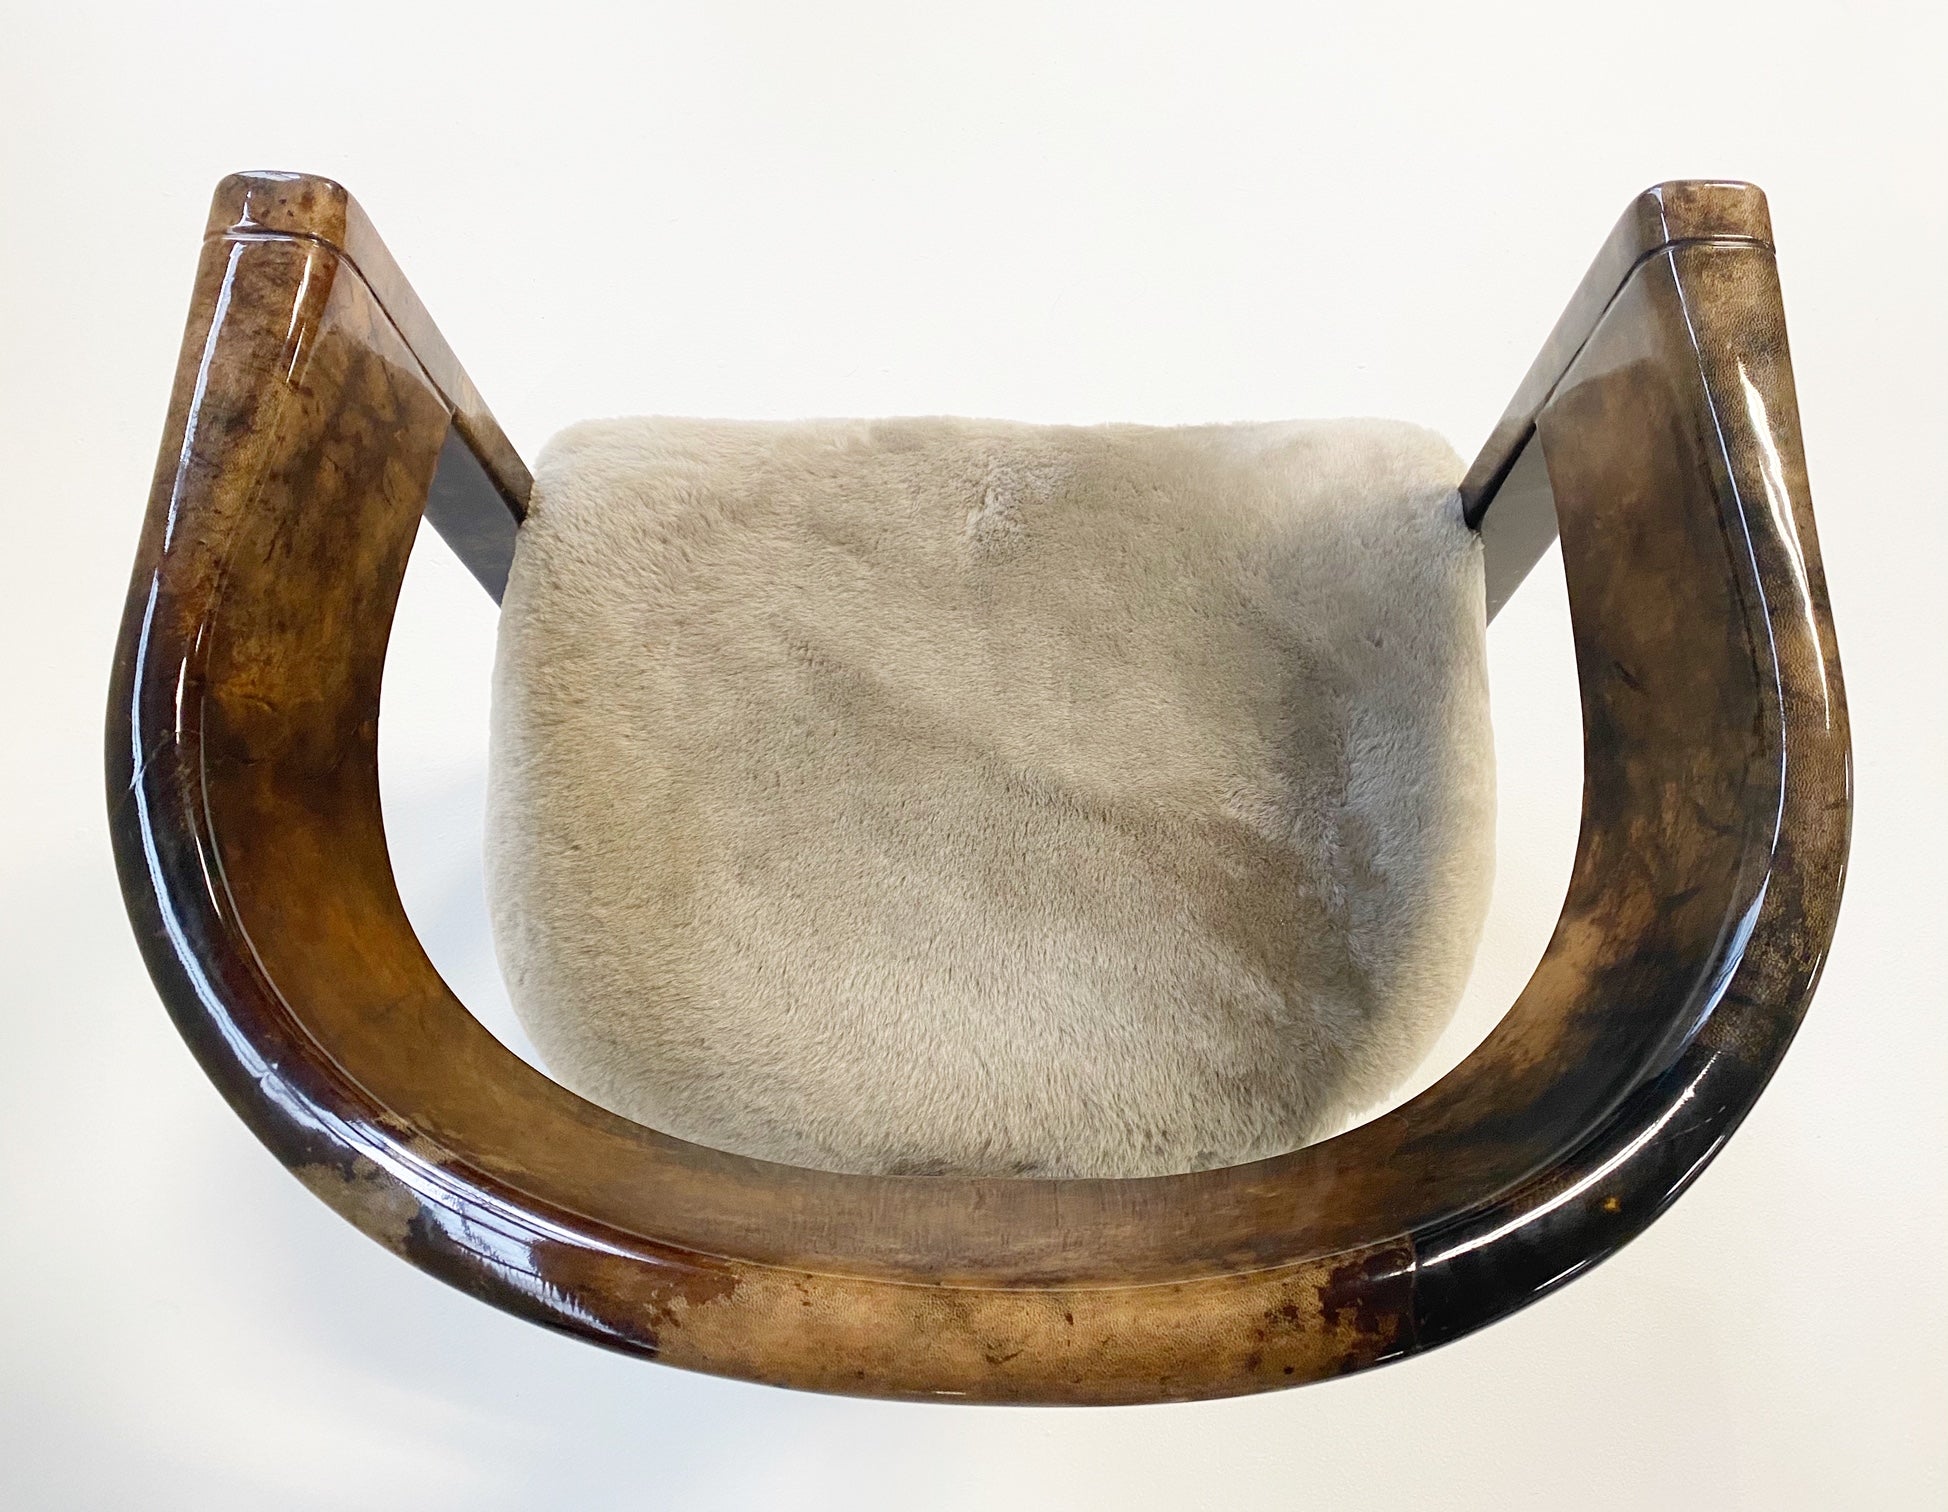 Lacquered Goatskin Armchair in Shearling - FORSYTH